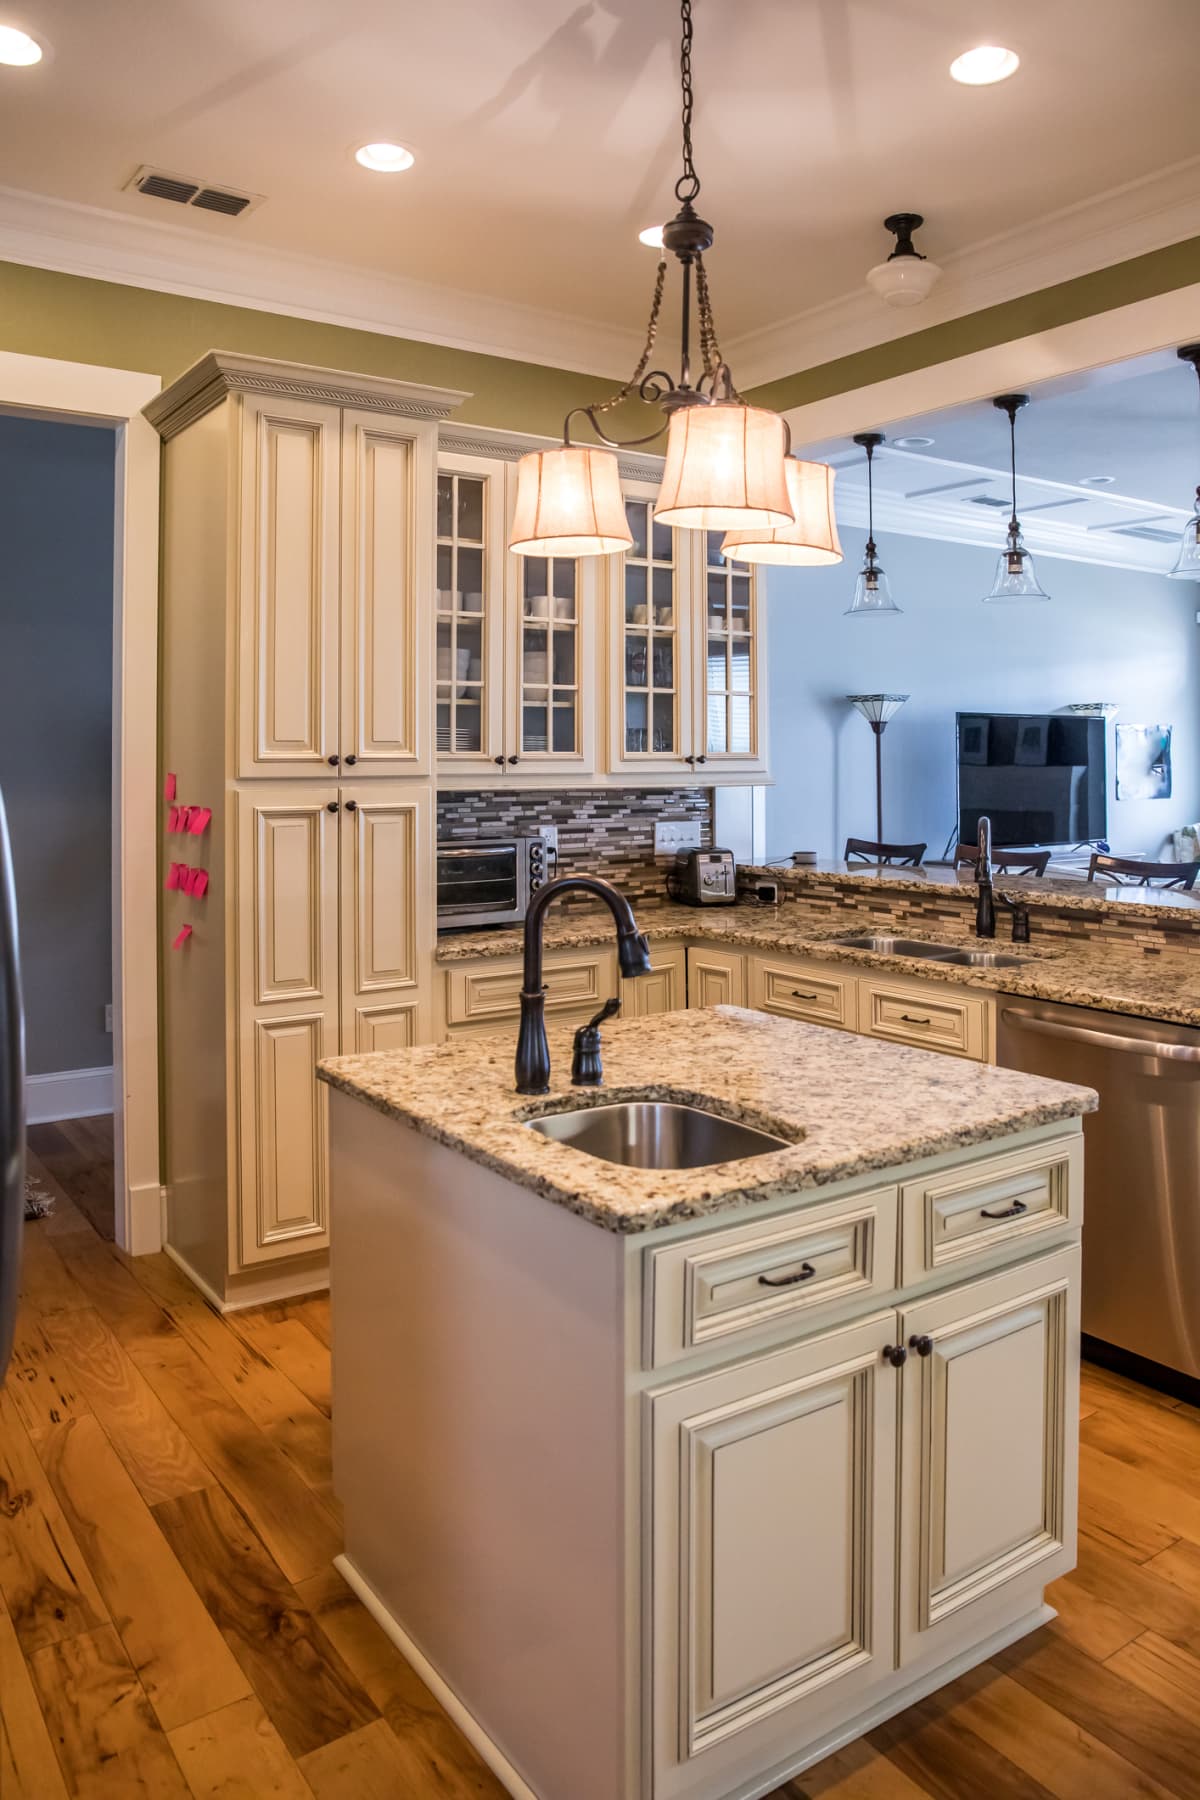 A square shaped kitchen with cream colored cabinets and granite countertops